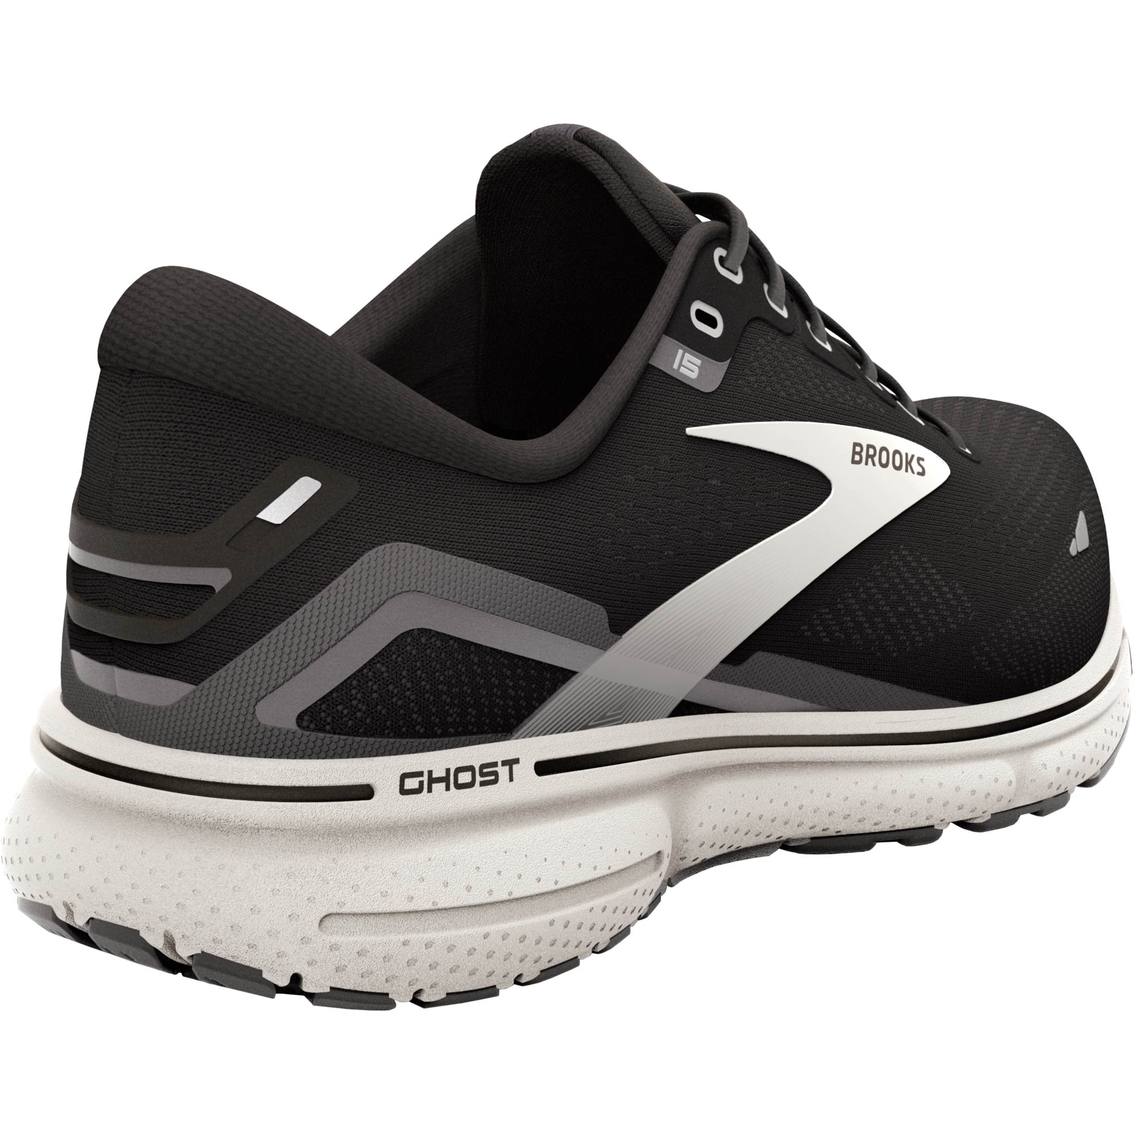 Brooks Ghost 15 Running Shoes - Image 4 of 6